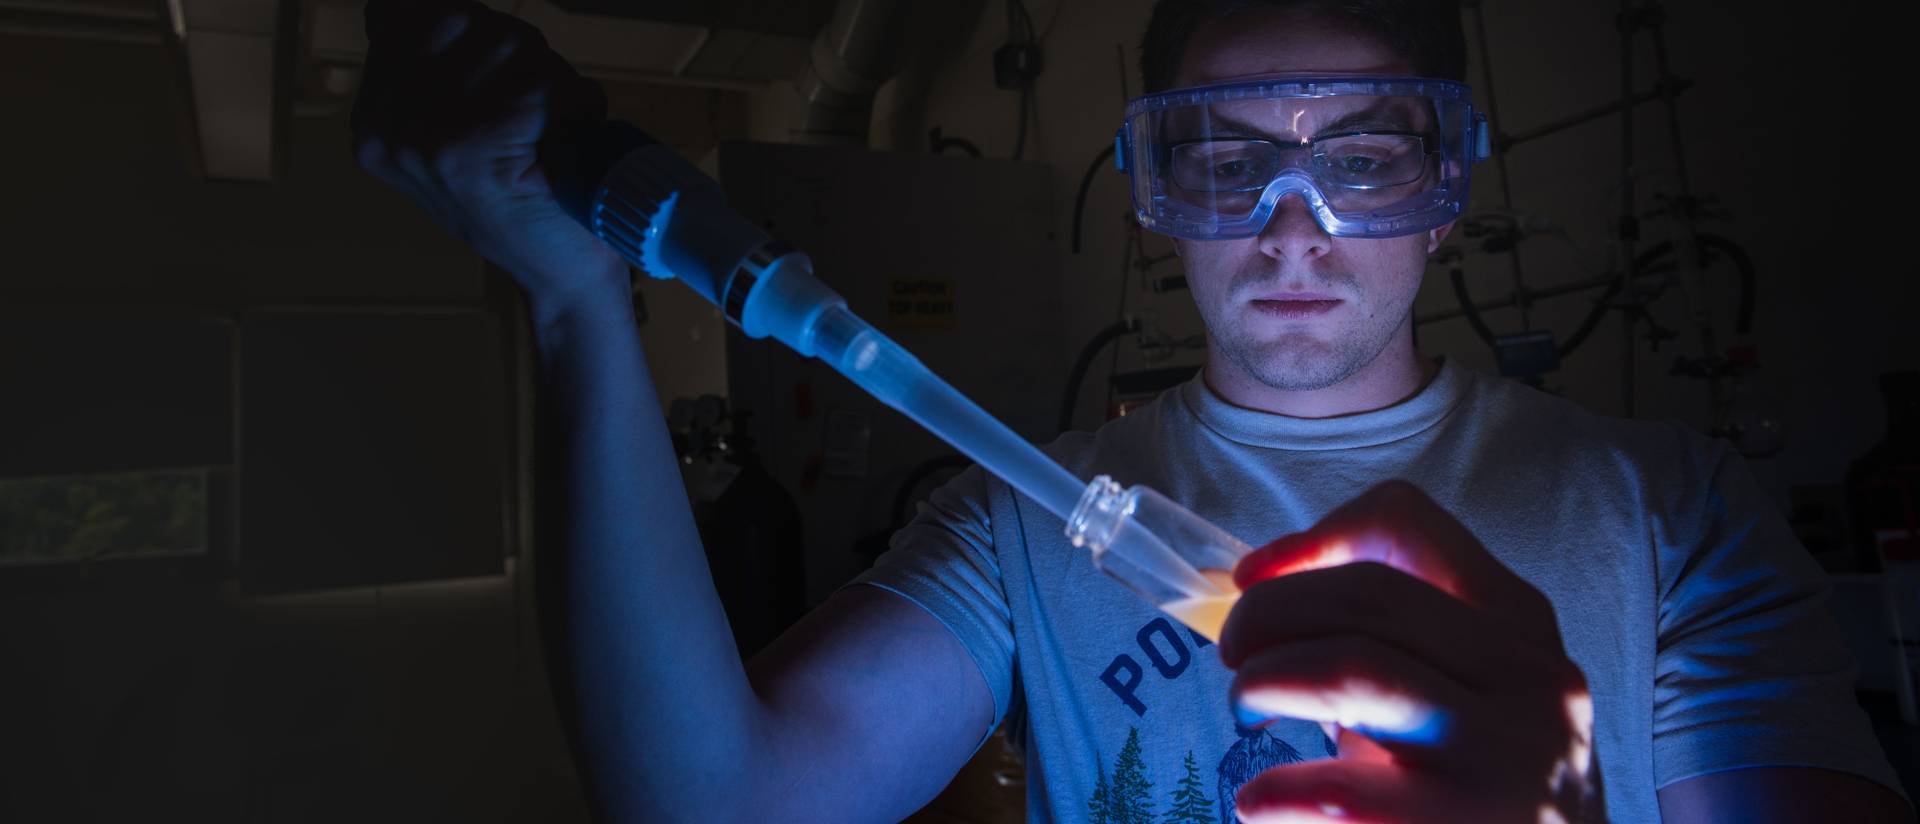 Erik Engness uses a device to place a liquid into a glass container in a dark lab.